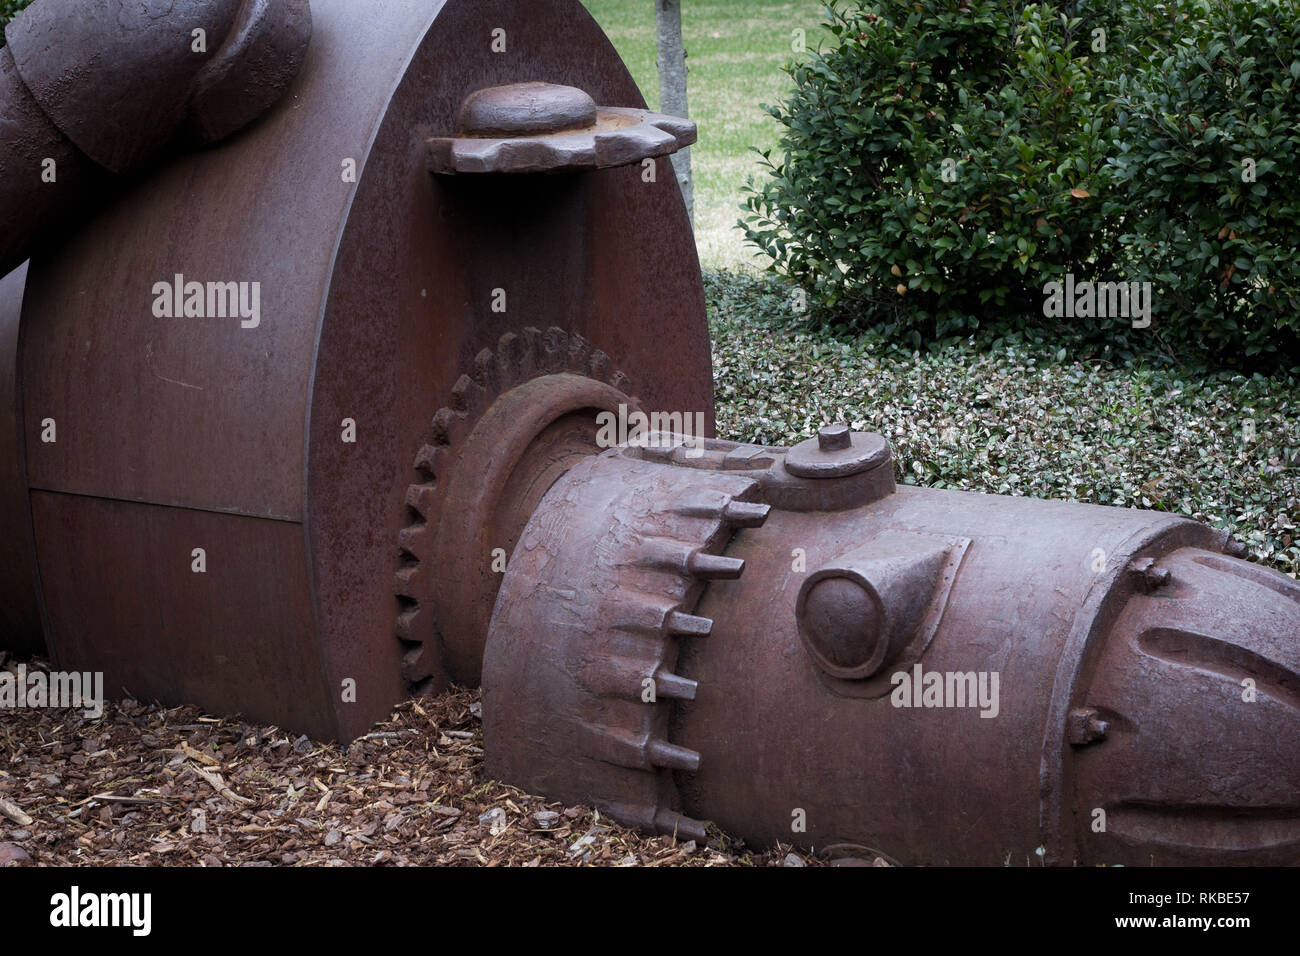 A royalty free image of a robot statue that has been rusted and lying on the ground. Stock Photo